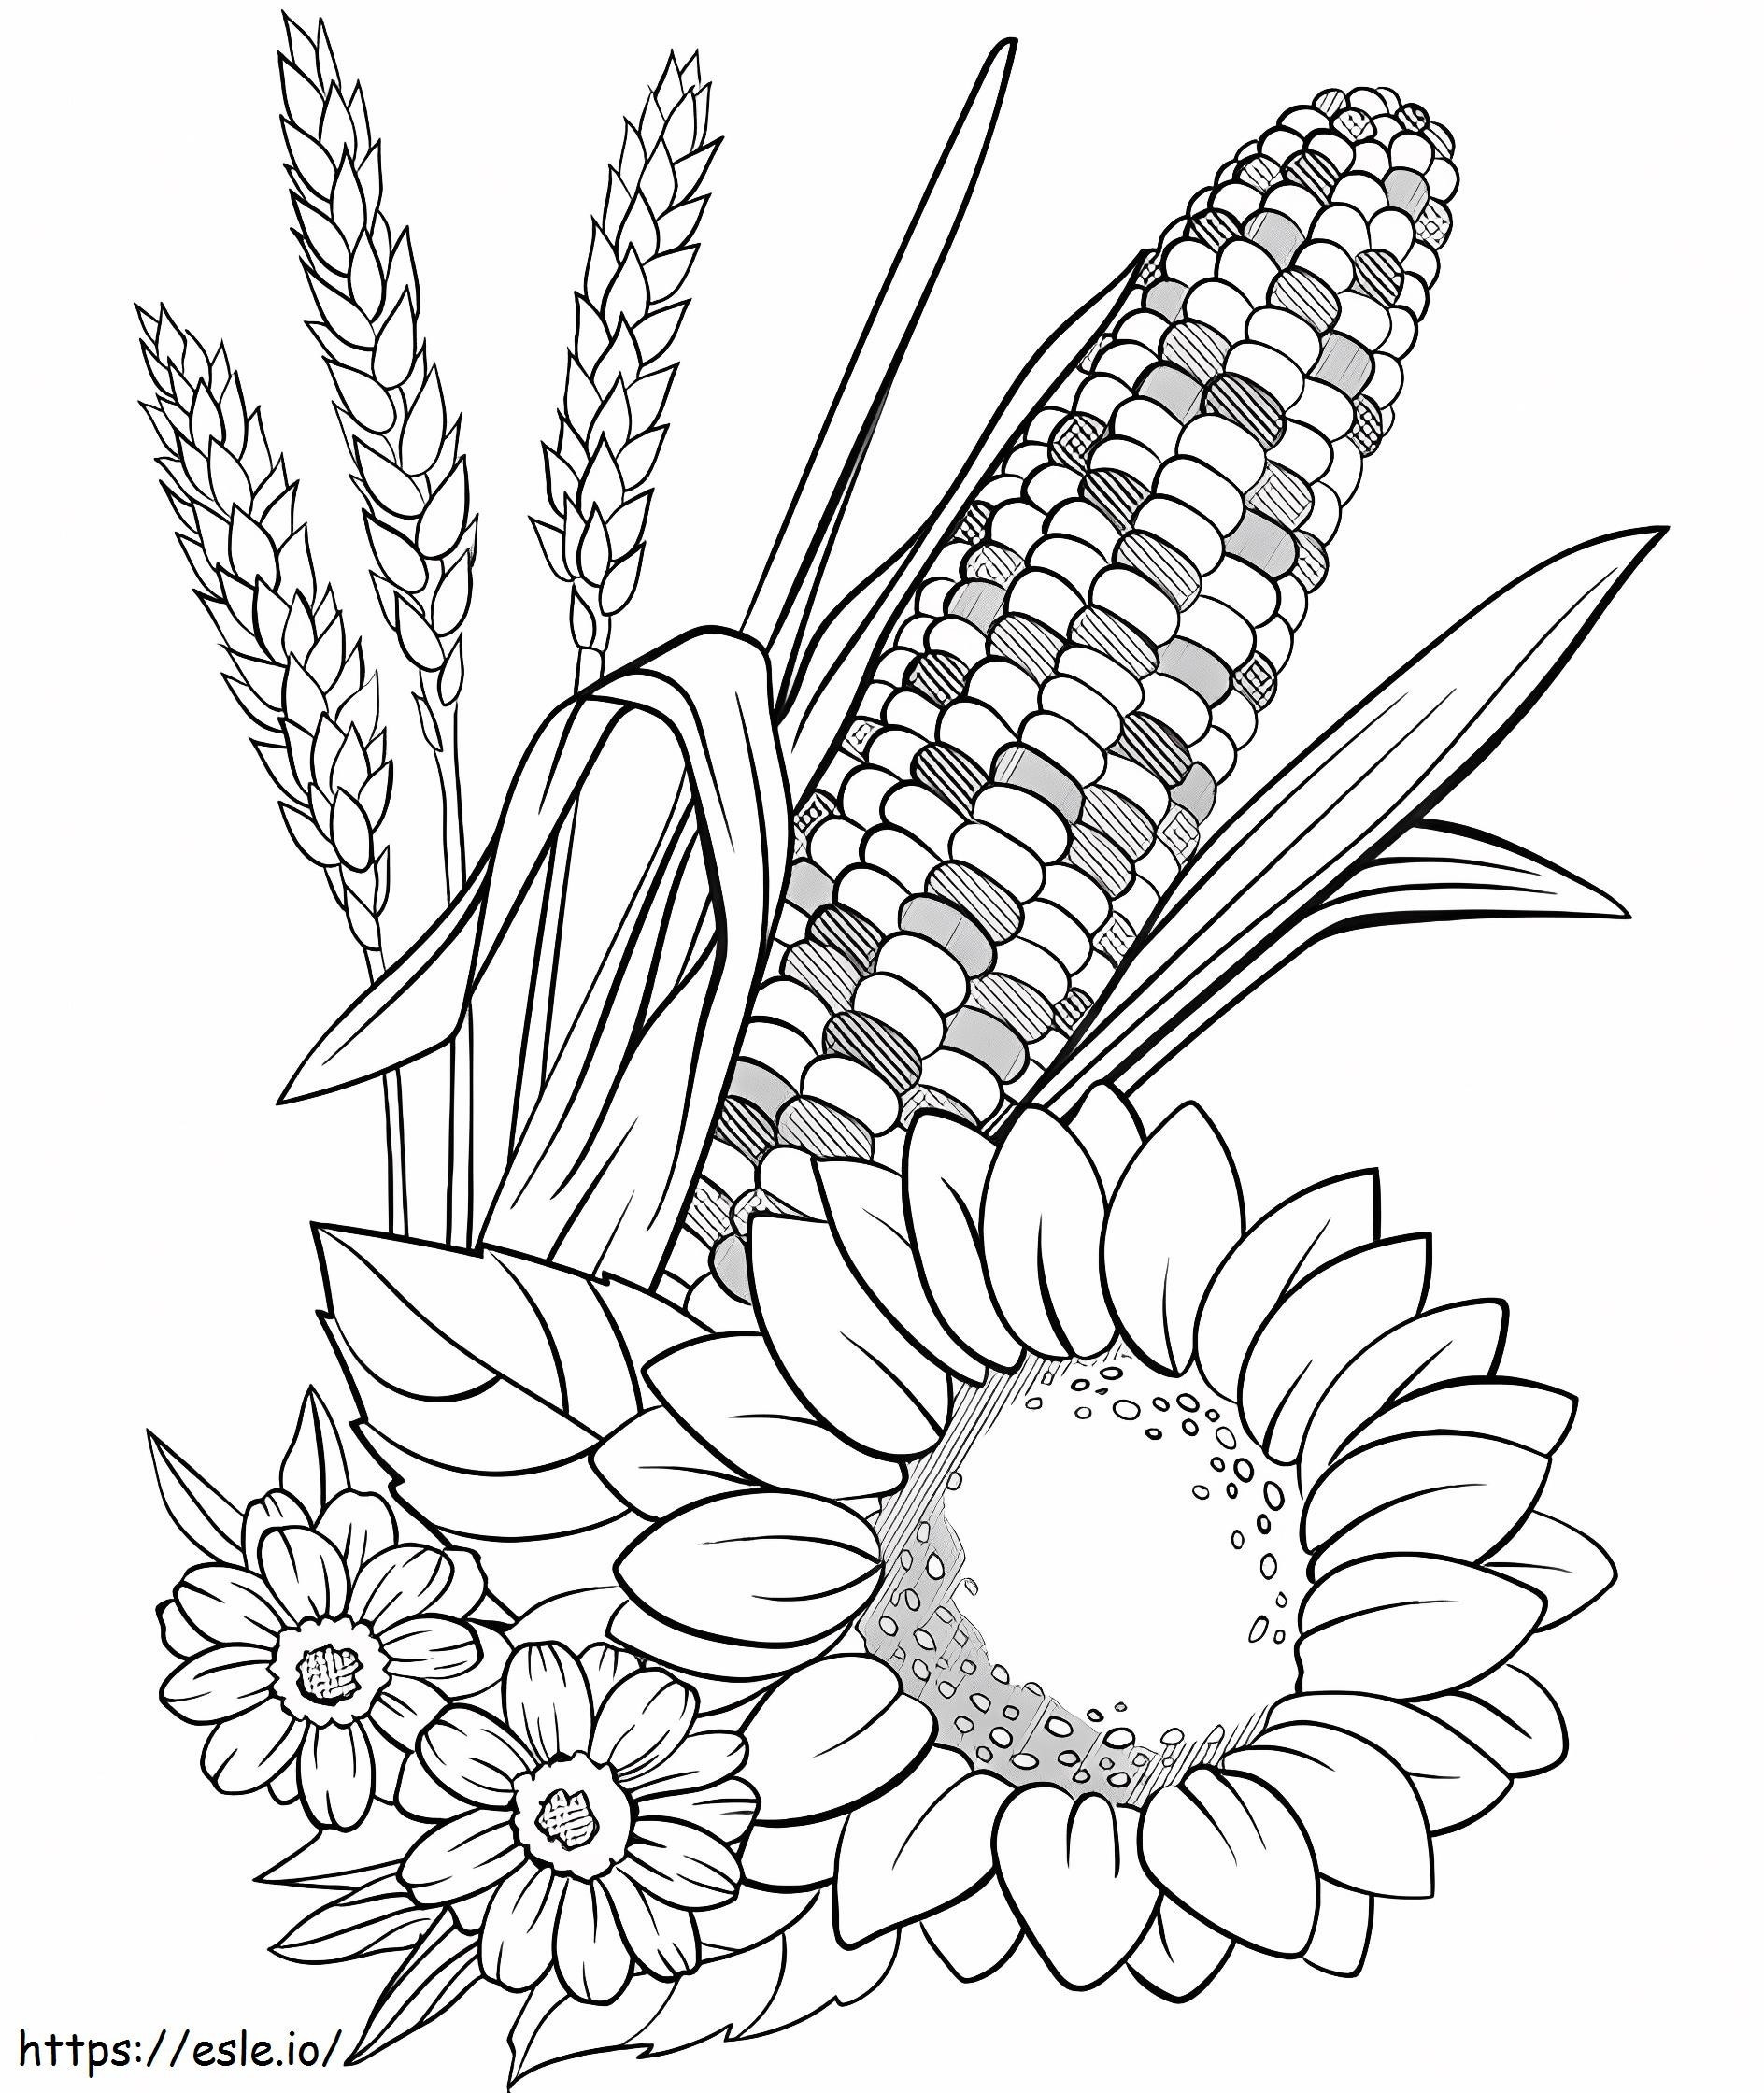 Corn And Flower coloring page